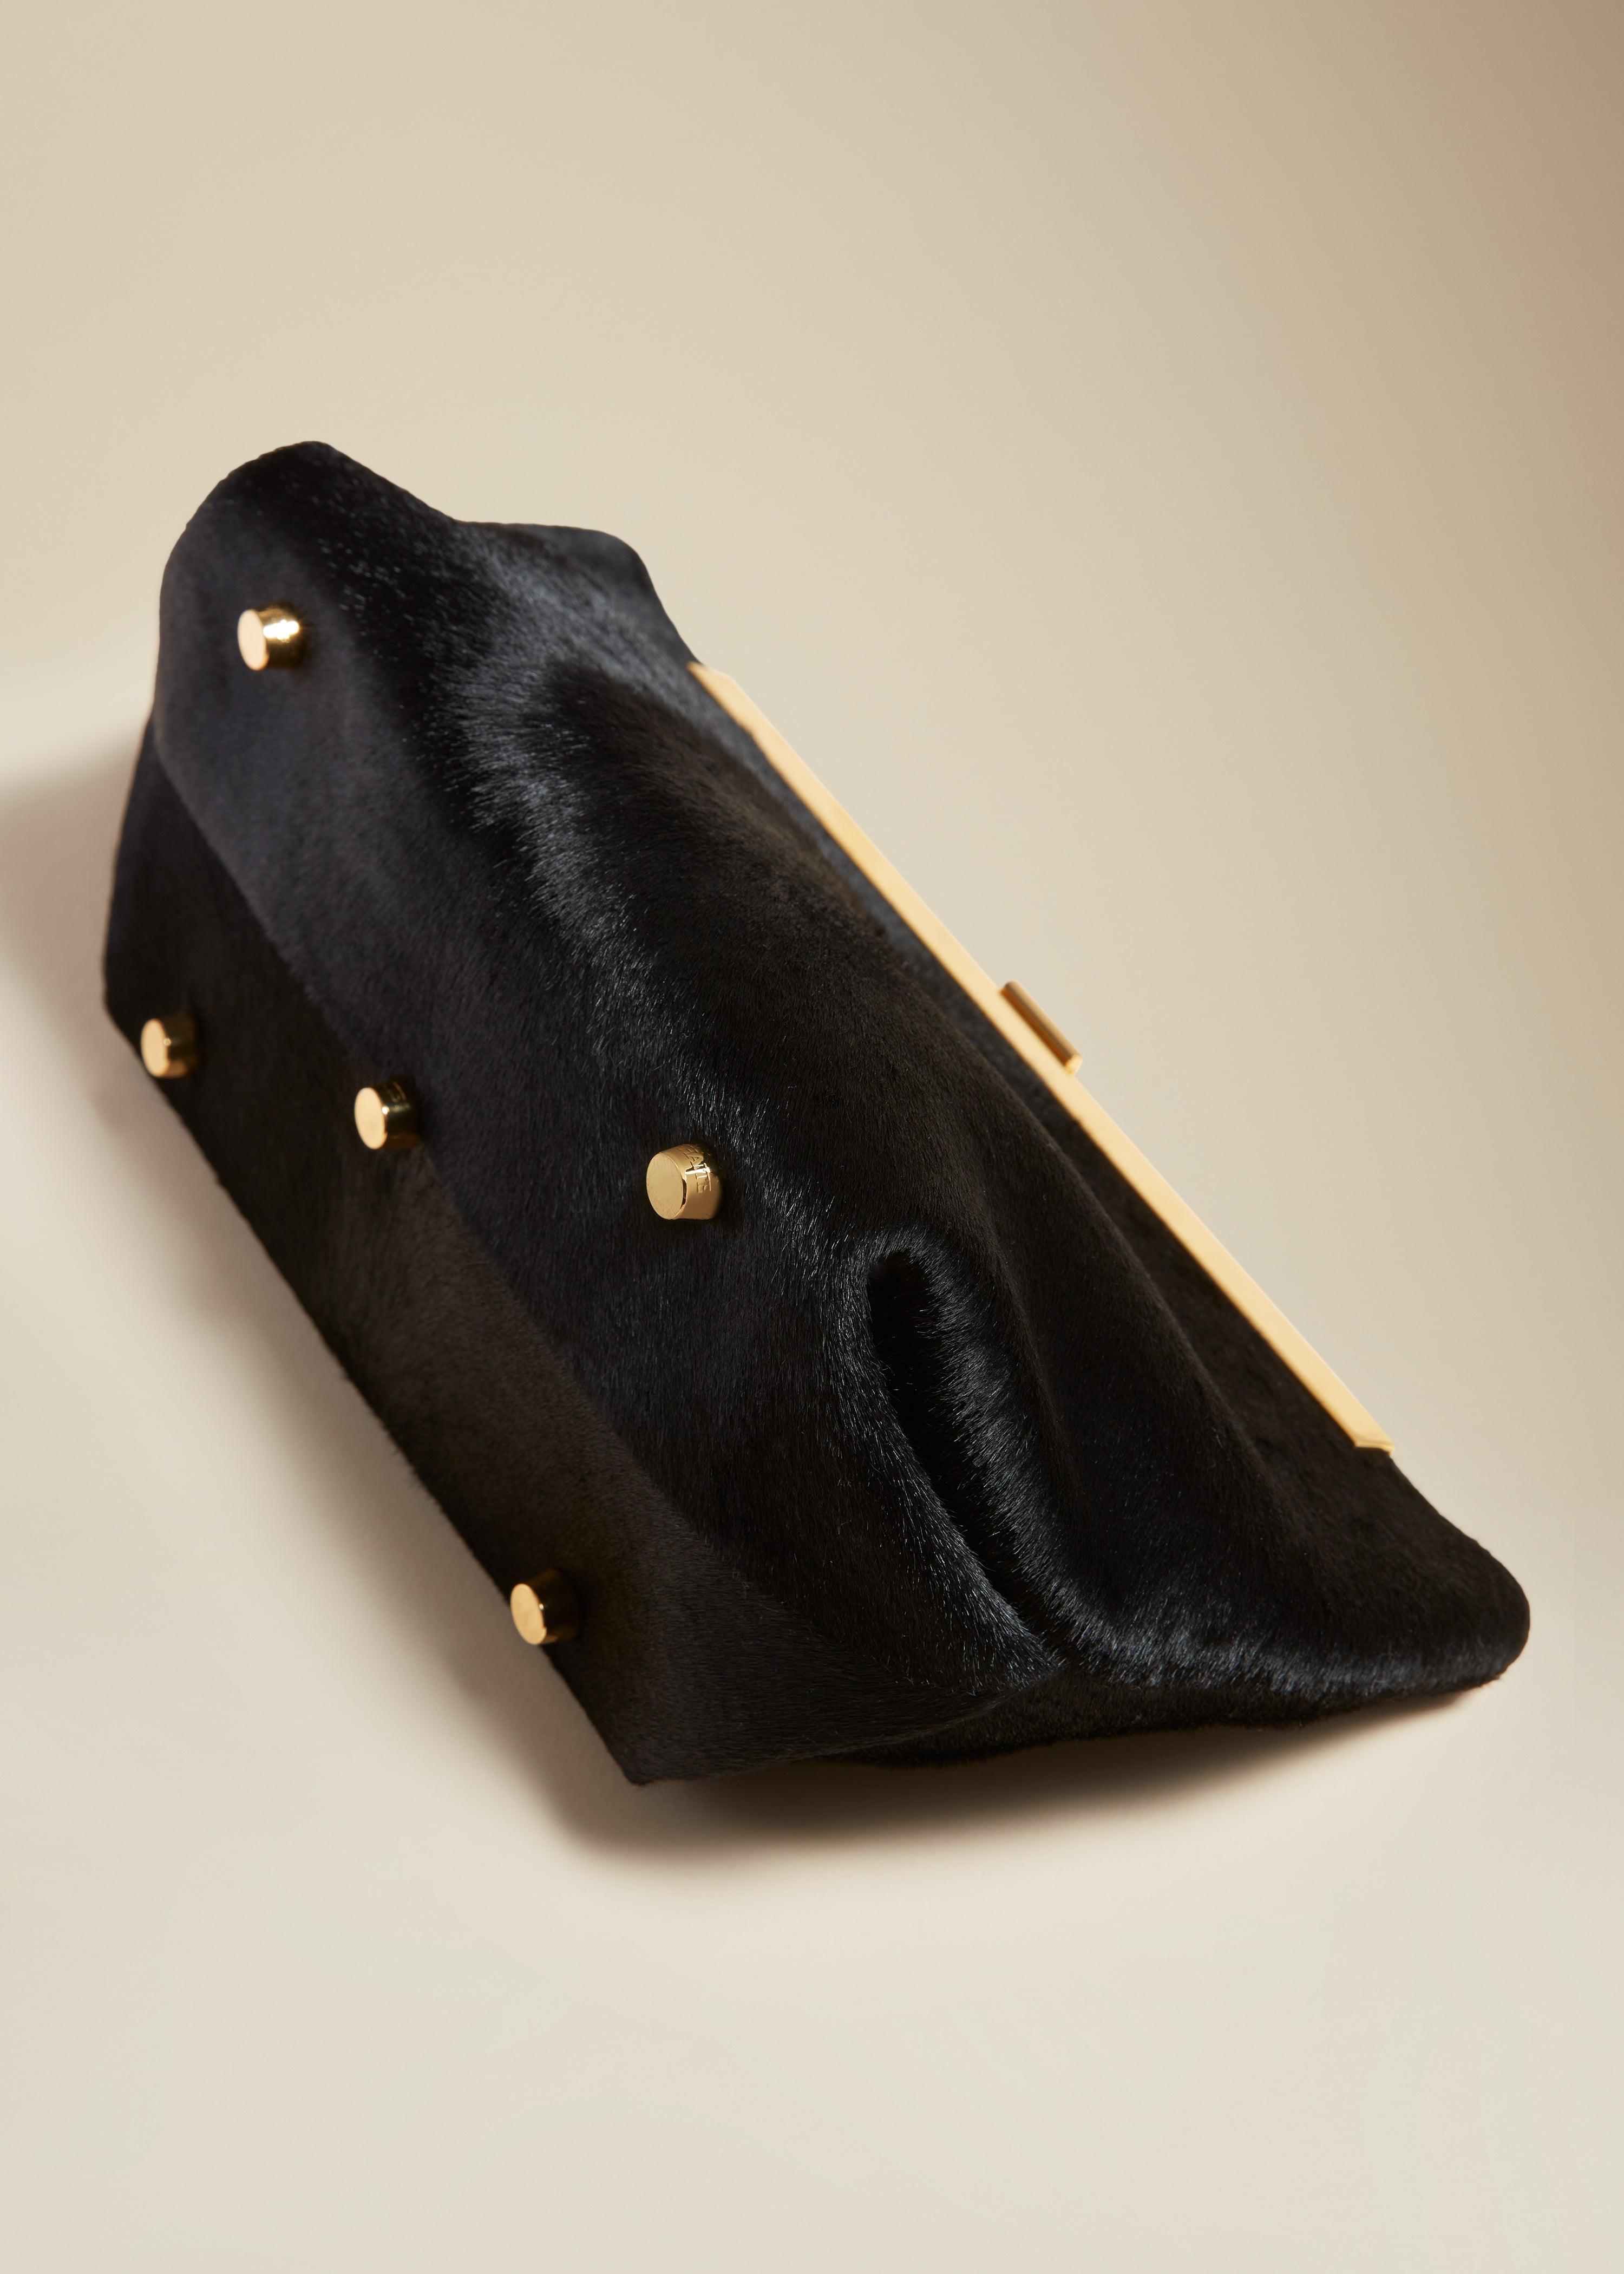 The Aimee Clutch in Black Haircalf - The Iconic Issue